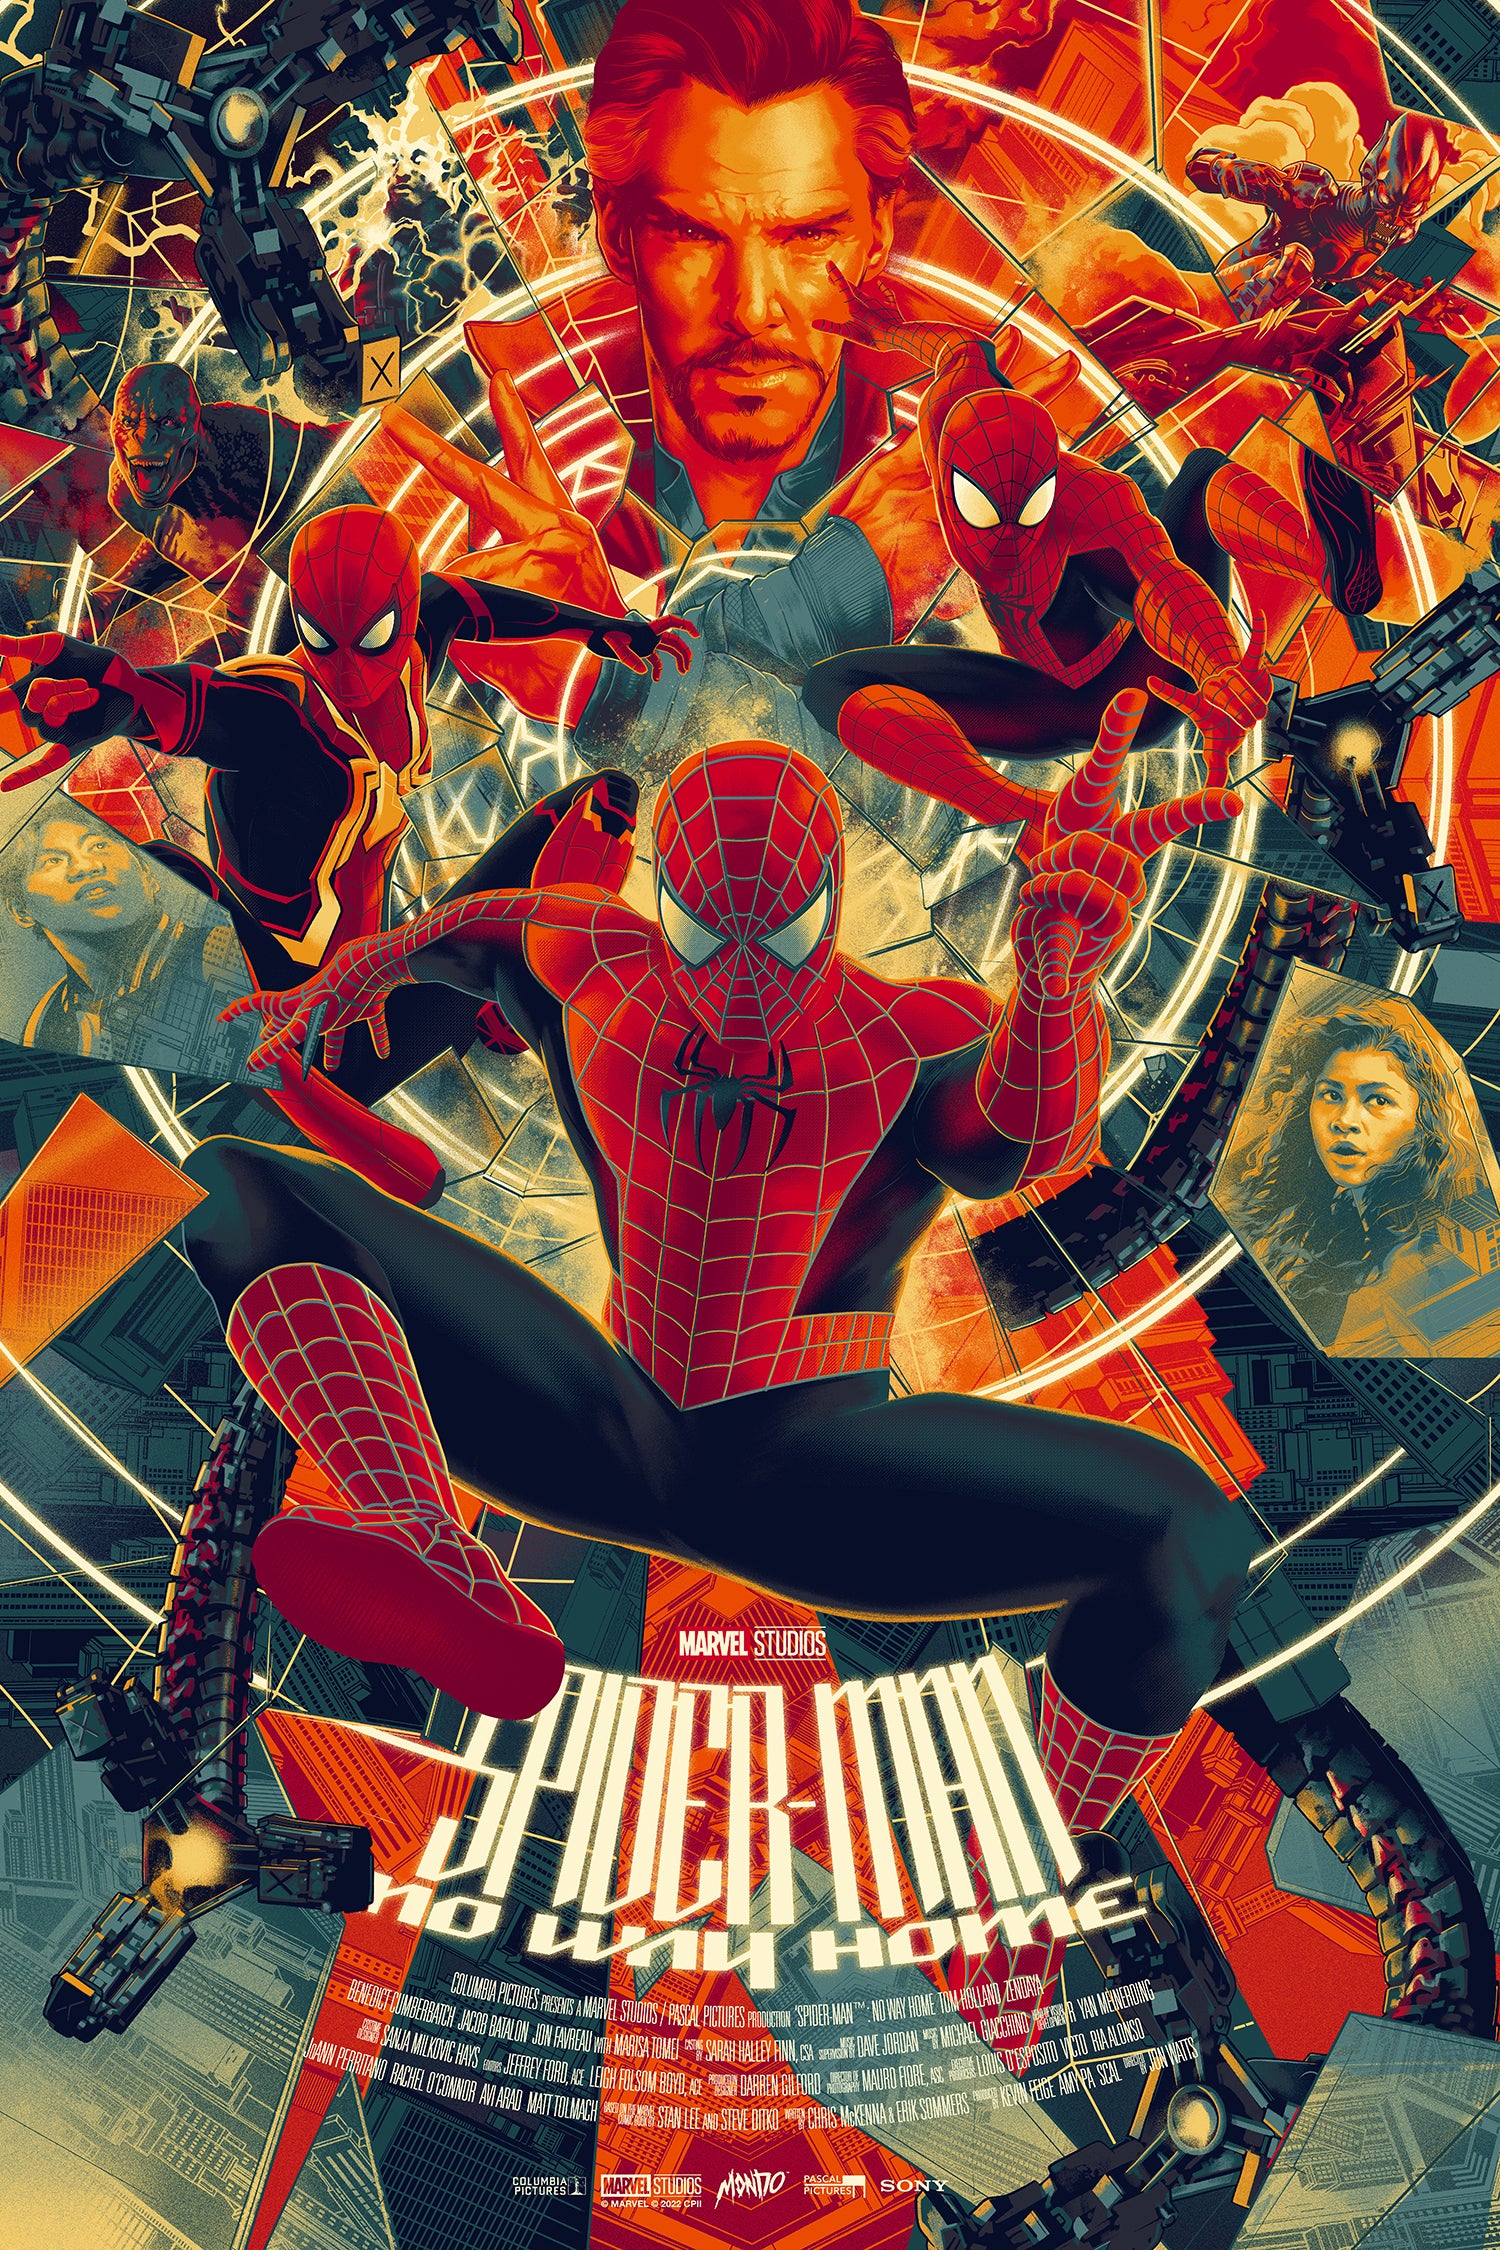 The Spider-Man - A comic book hero Poster